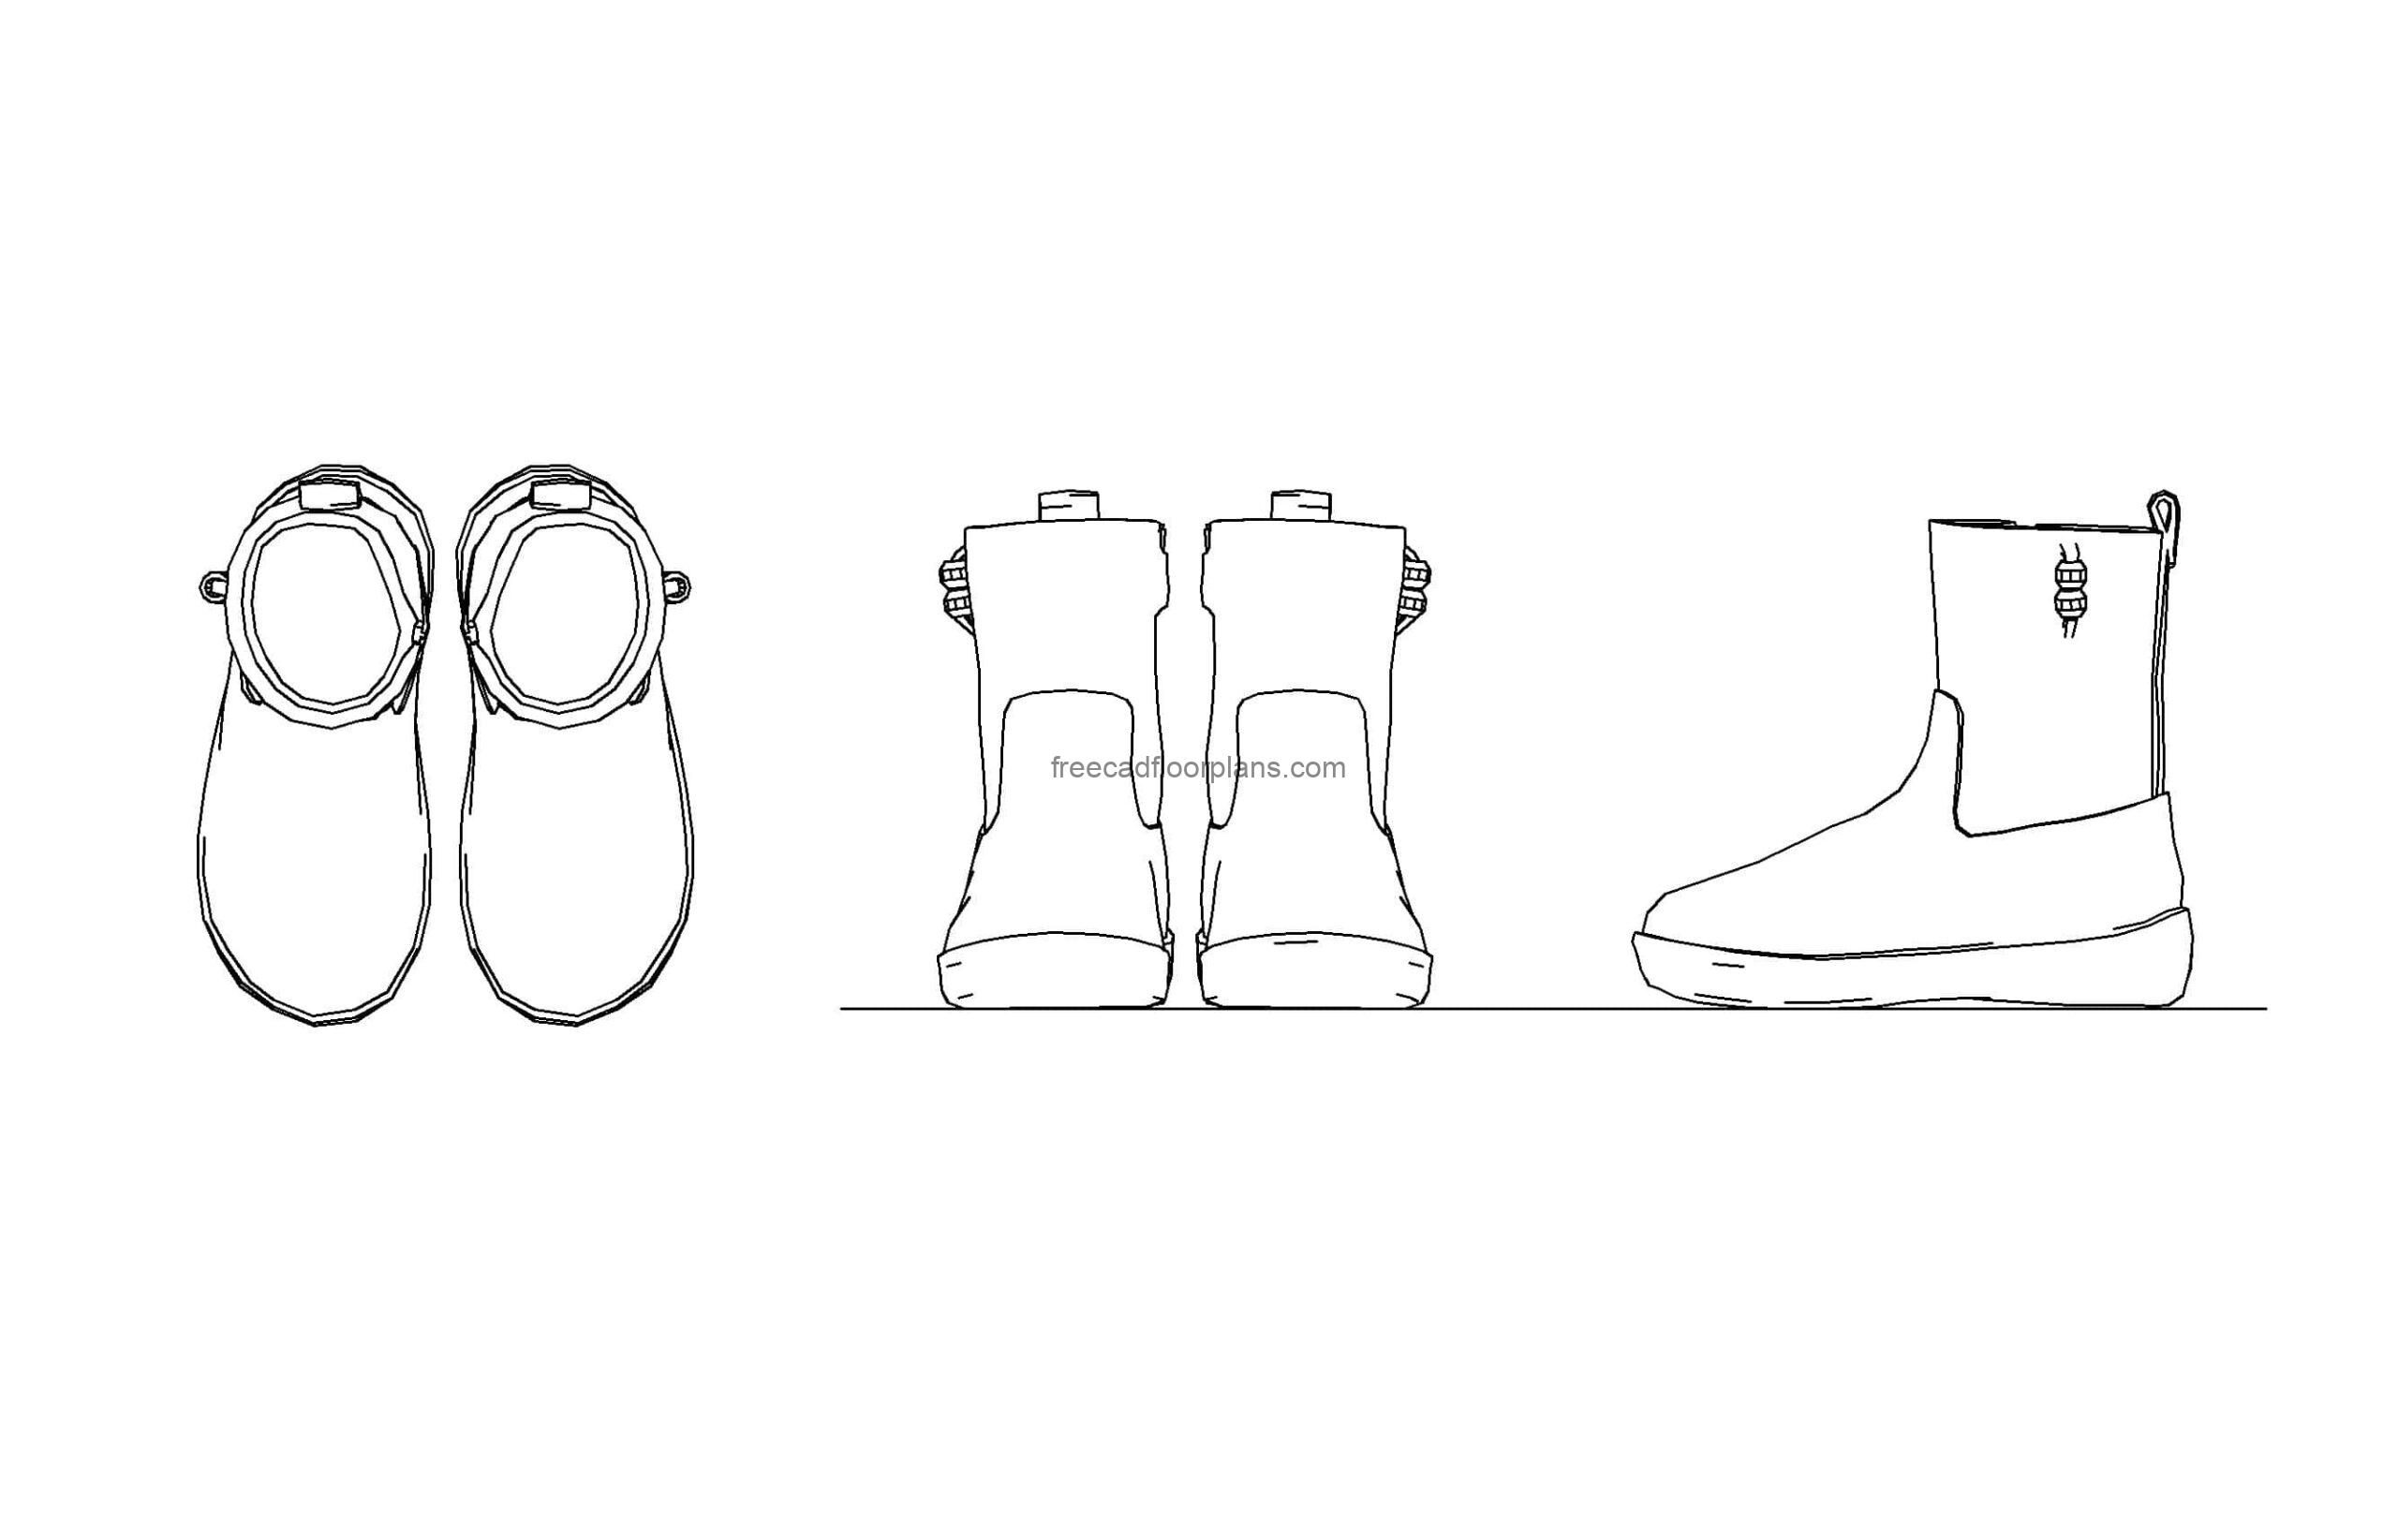 boot shoes autocad drawing plan and elevation 2d views dwg file free for download